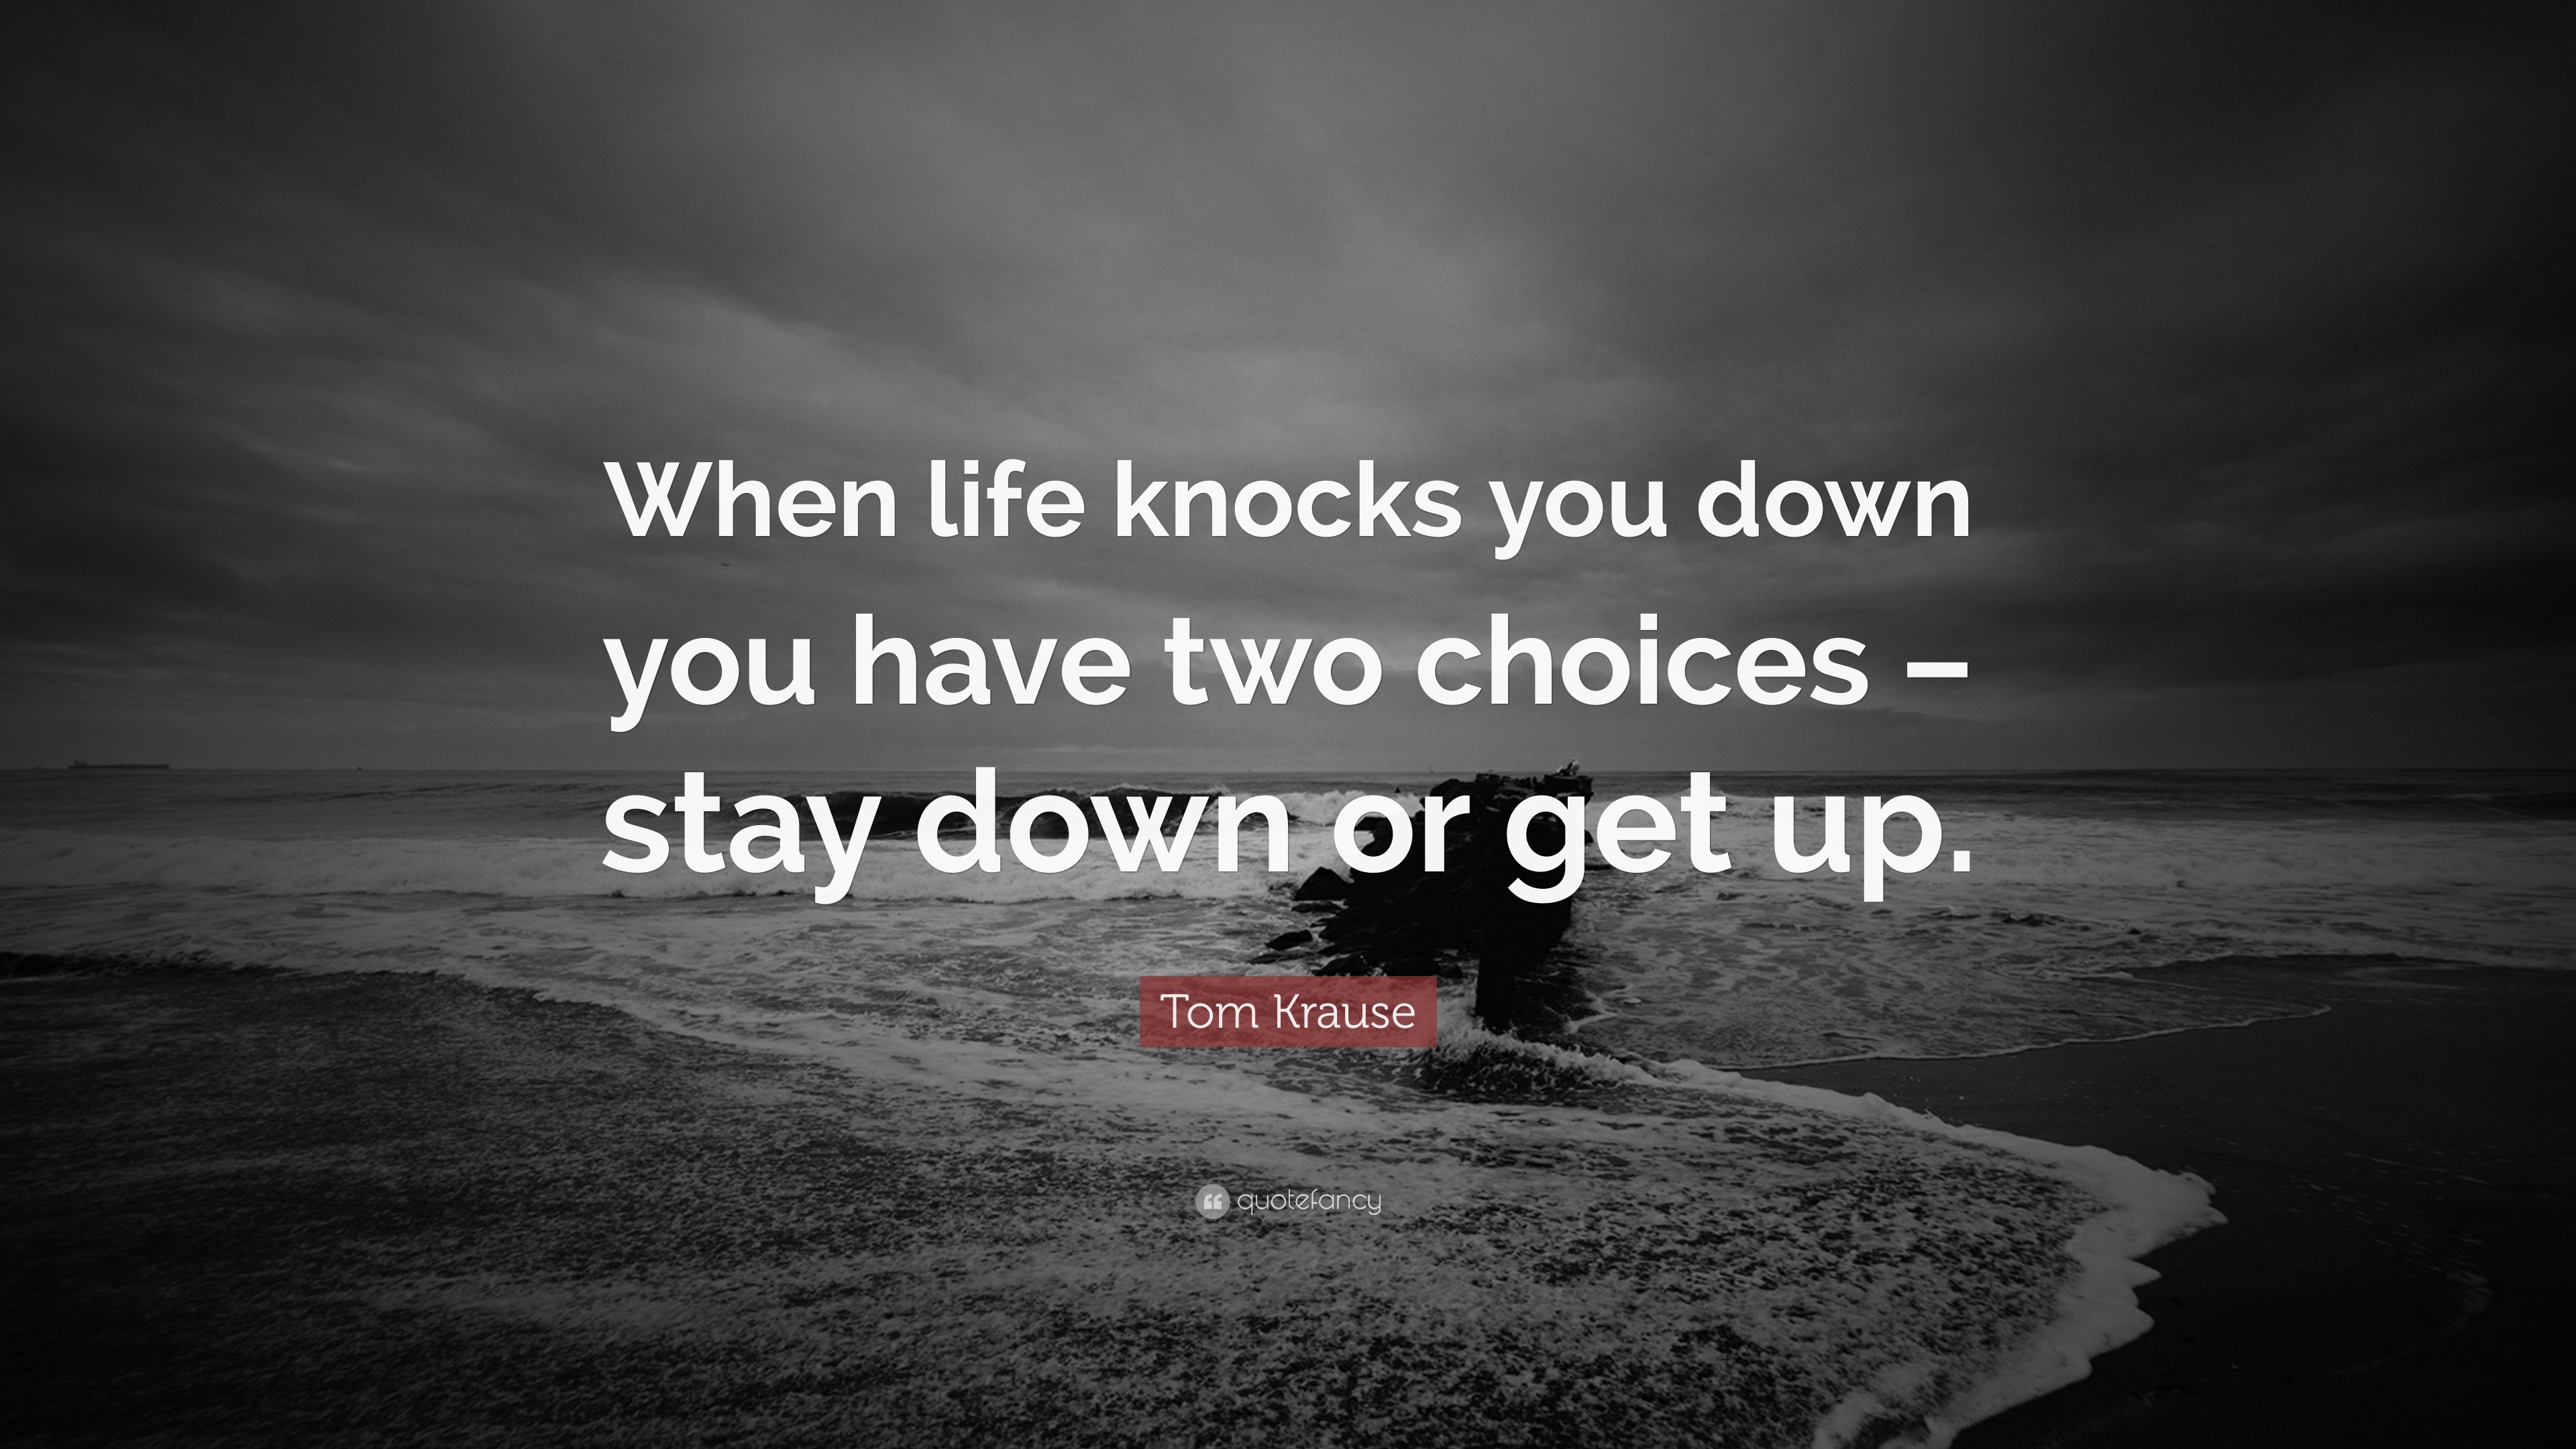 Tom Krause Quote: “When Life Knocks You Down You Have Two Choices – Stay Down Or Get